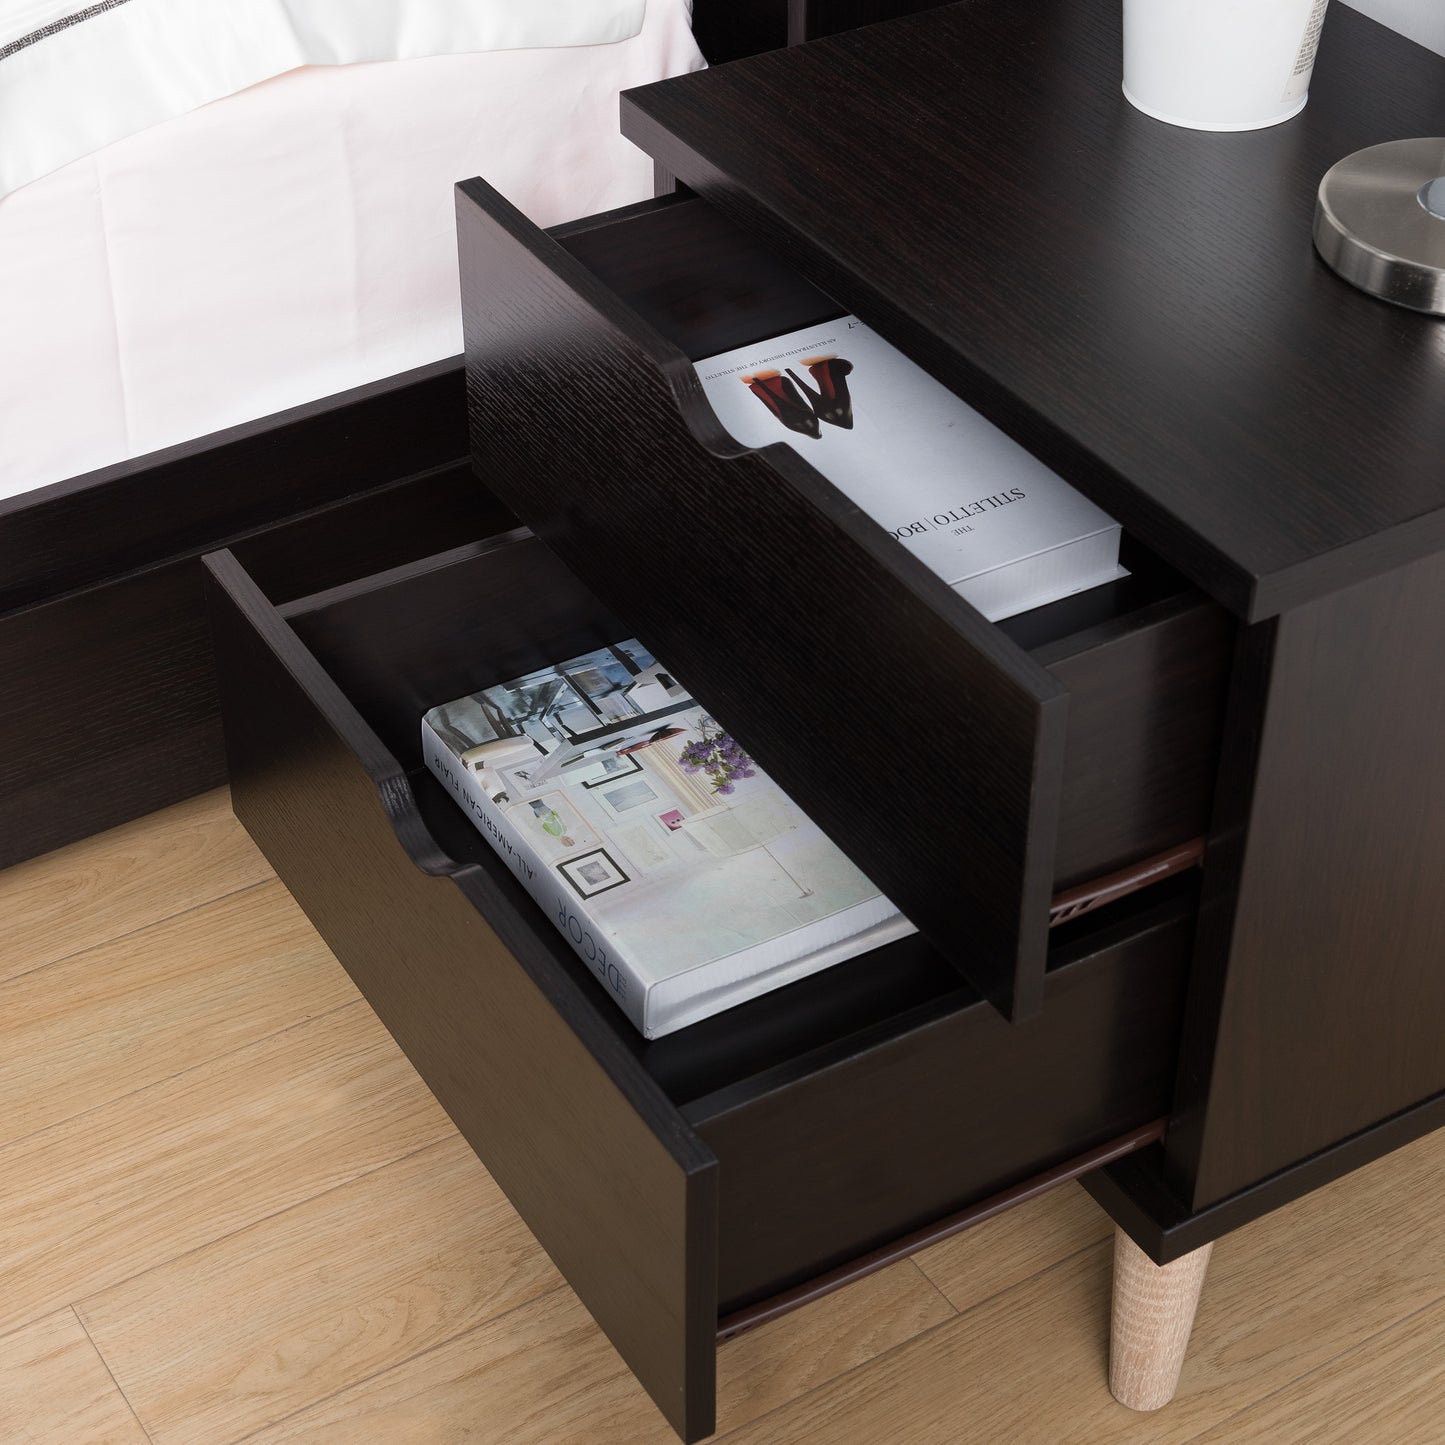 Left angled bird's eye view of a mid-century modern cappuccino two-drawer nightstand with drawers open in a bedroom with accessories